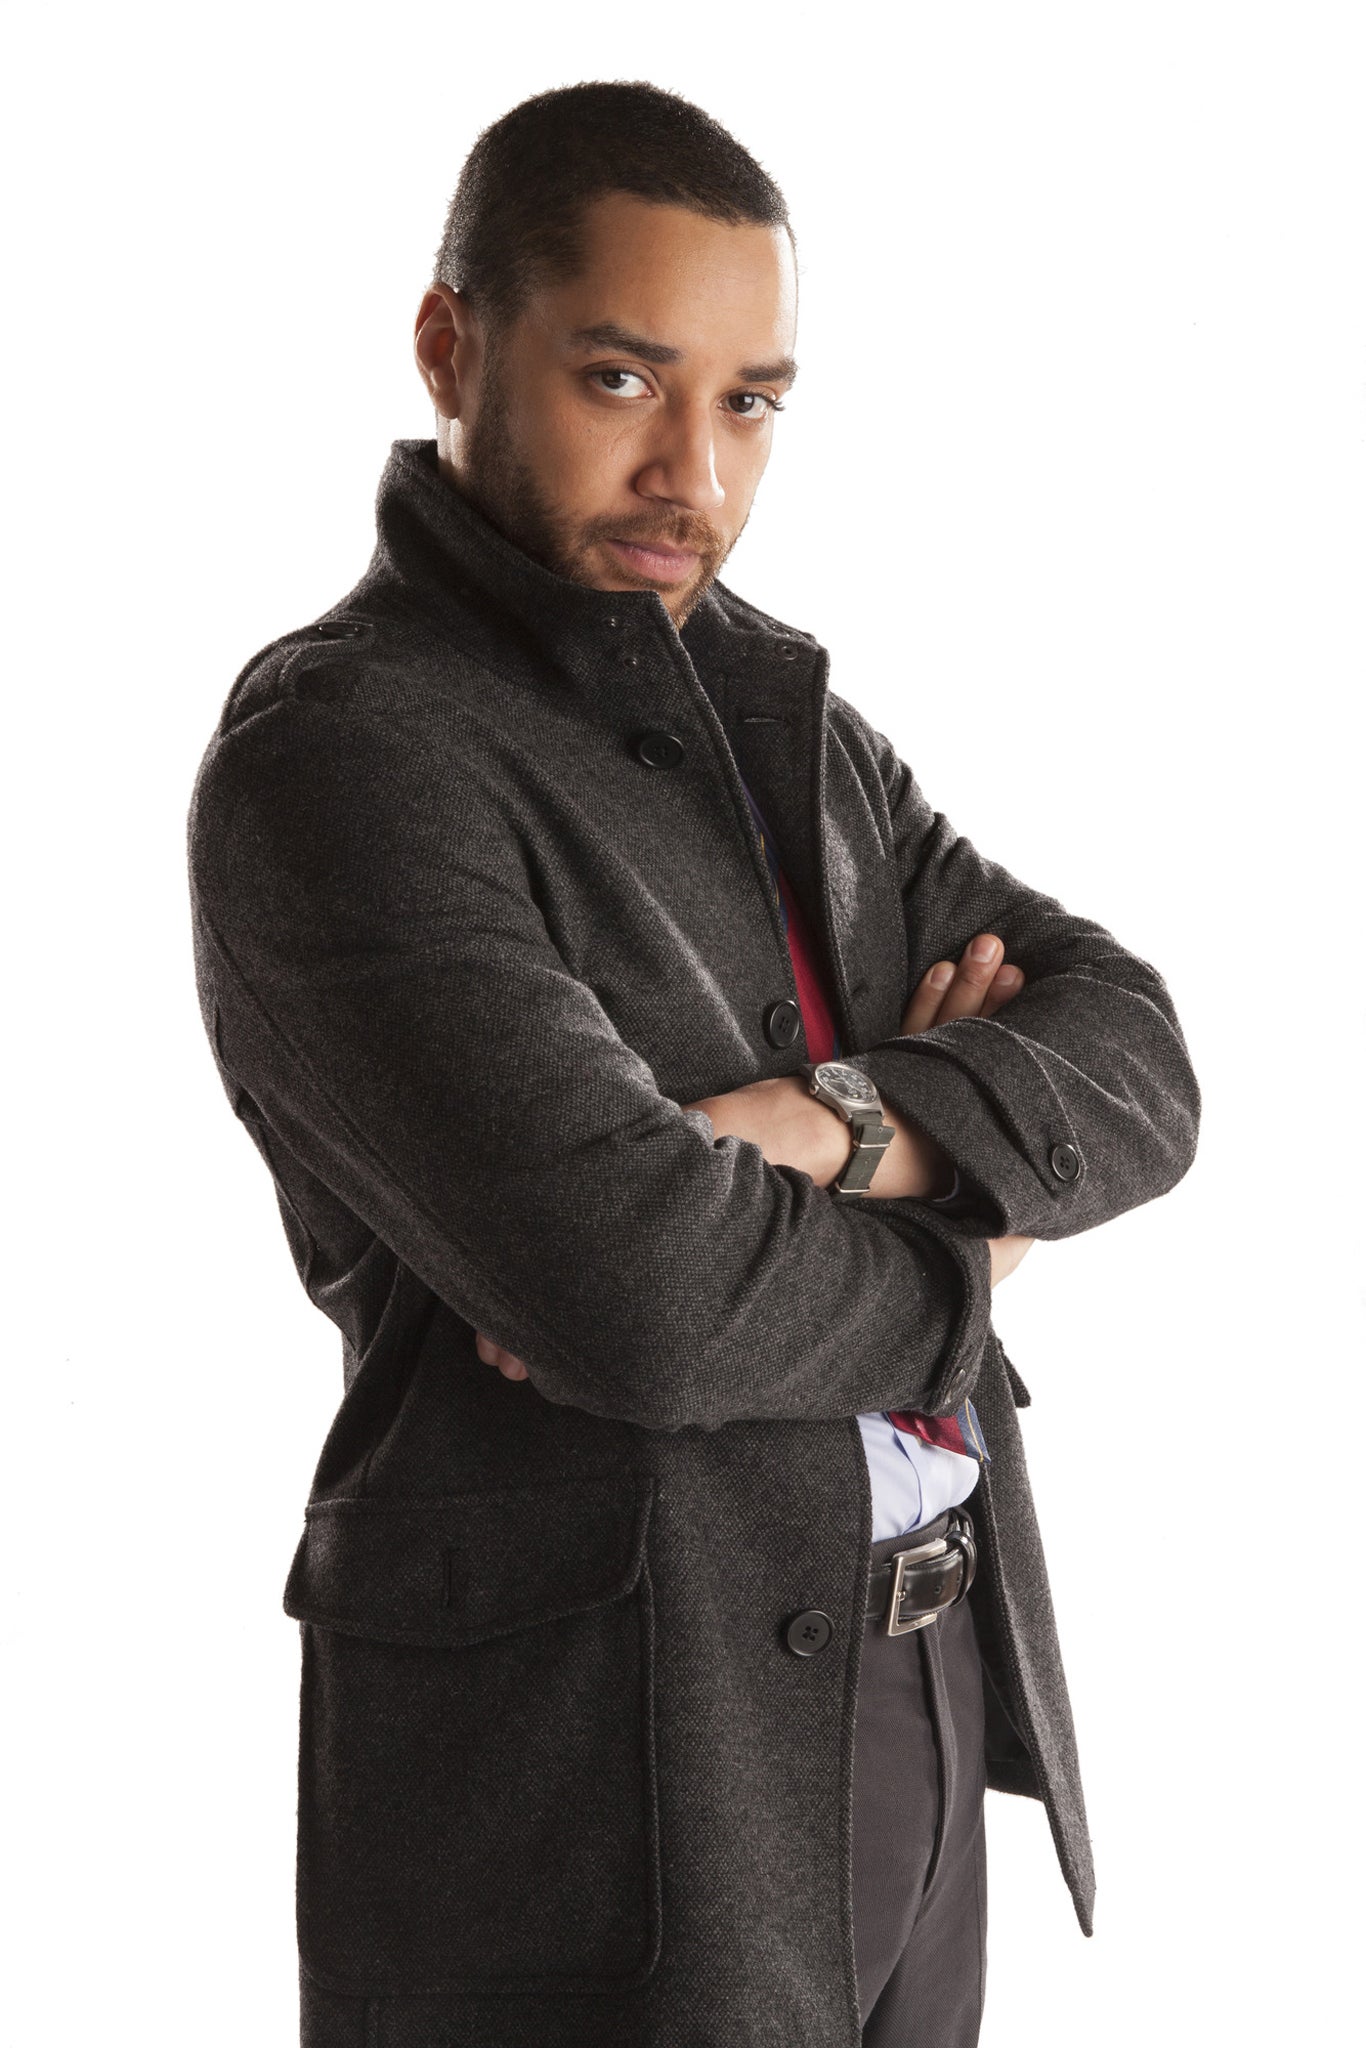 Actor Samuel Anderson joins the cast of Doctor Who